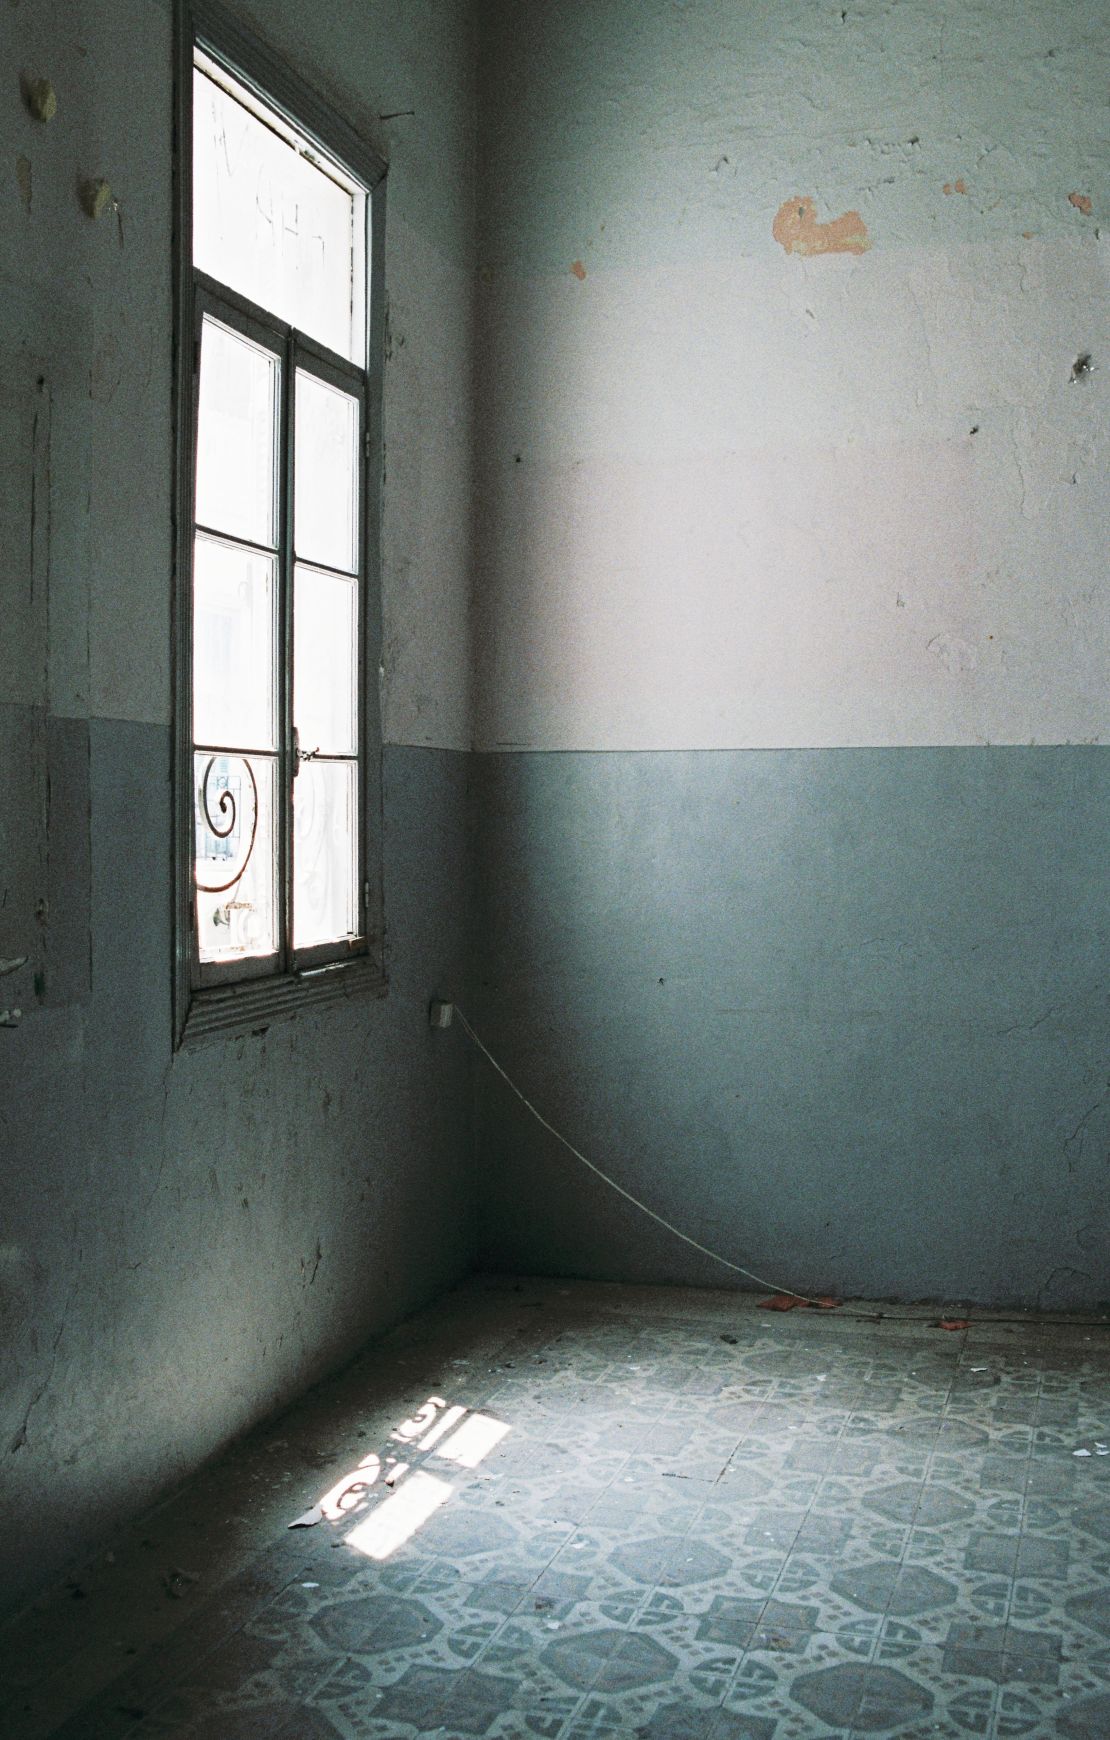 From the "Abandoned School" series by Lara Atallah of Lebanon 